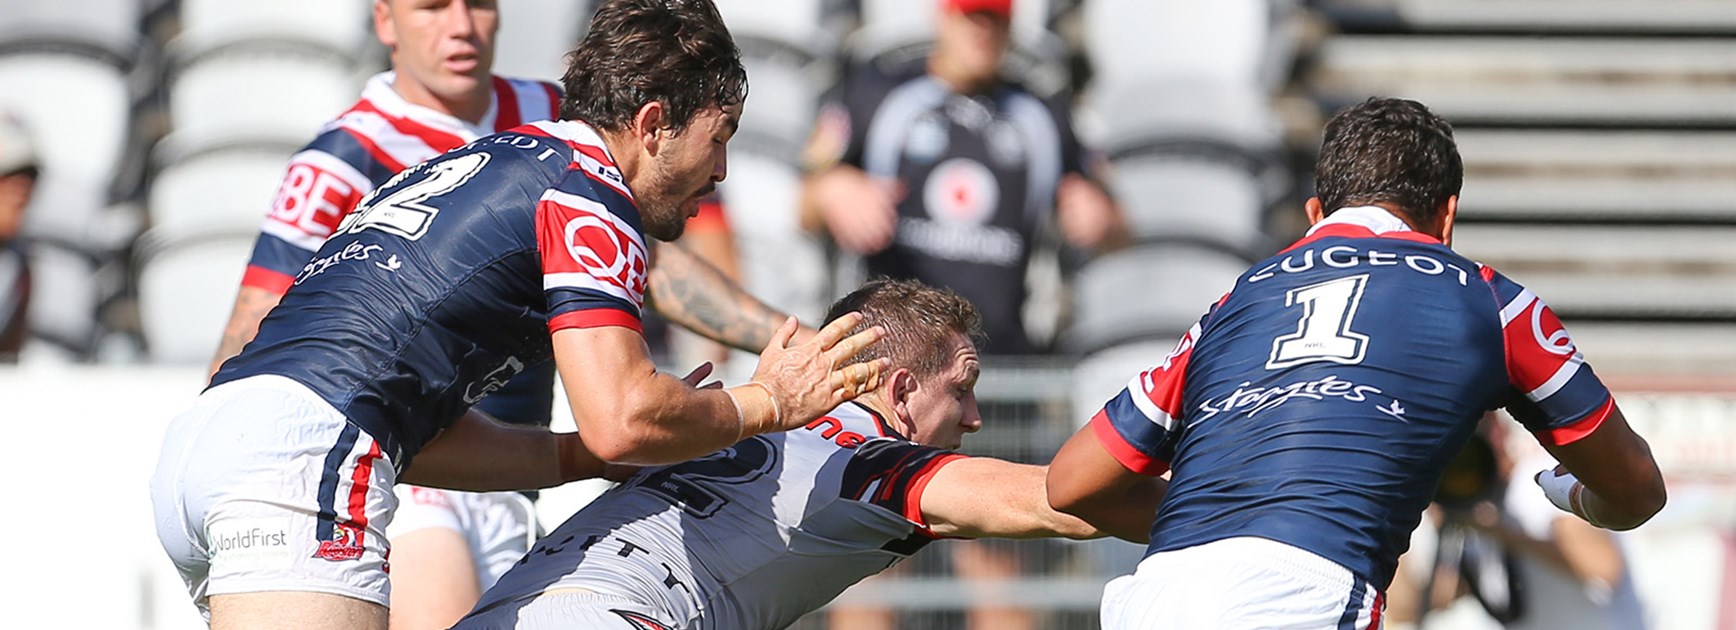 Ryan Hoffman is held back by the Roosters defence while trying to score a try in Round 5.